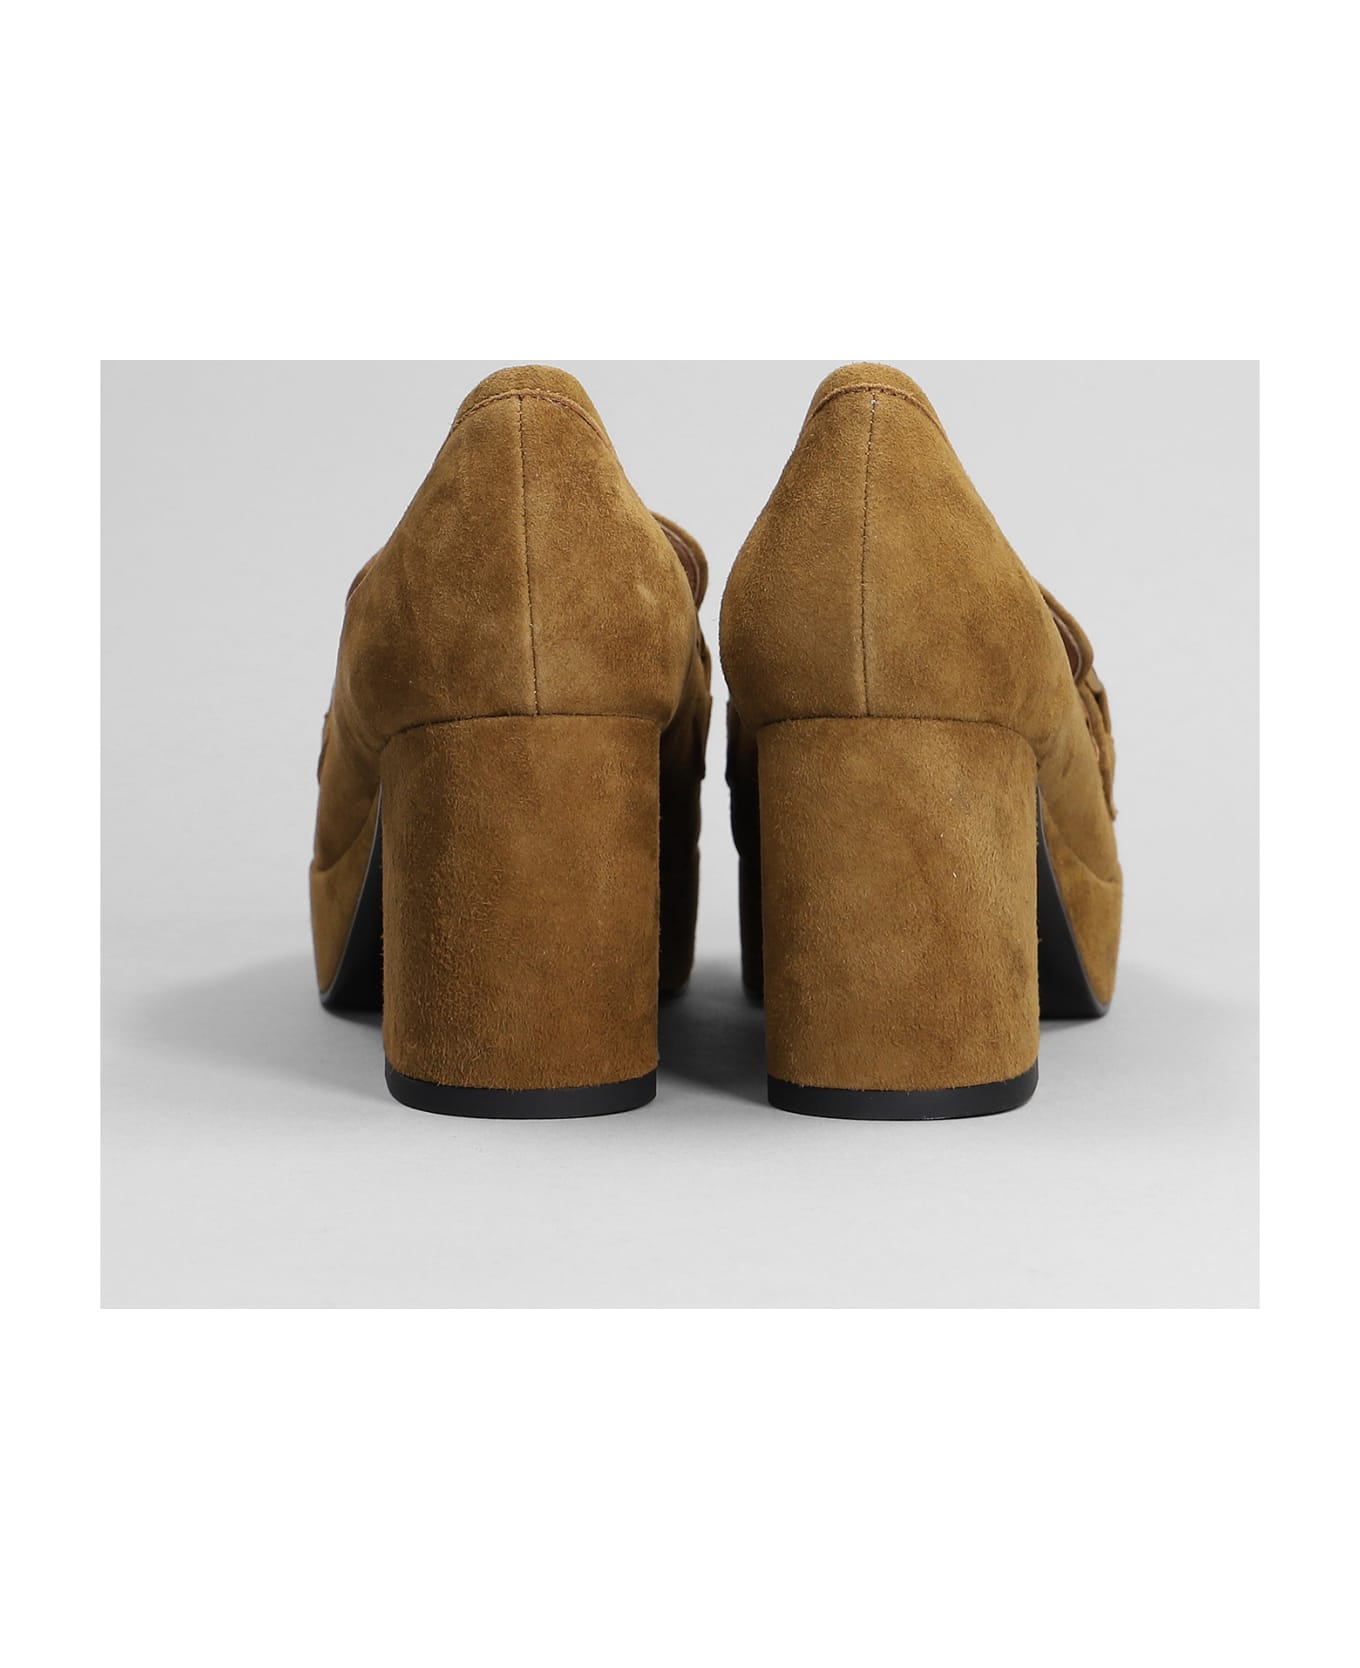 Bibi Lou Pumps In Leather Color Suede - leather color